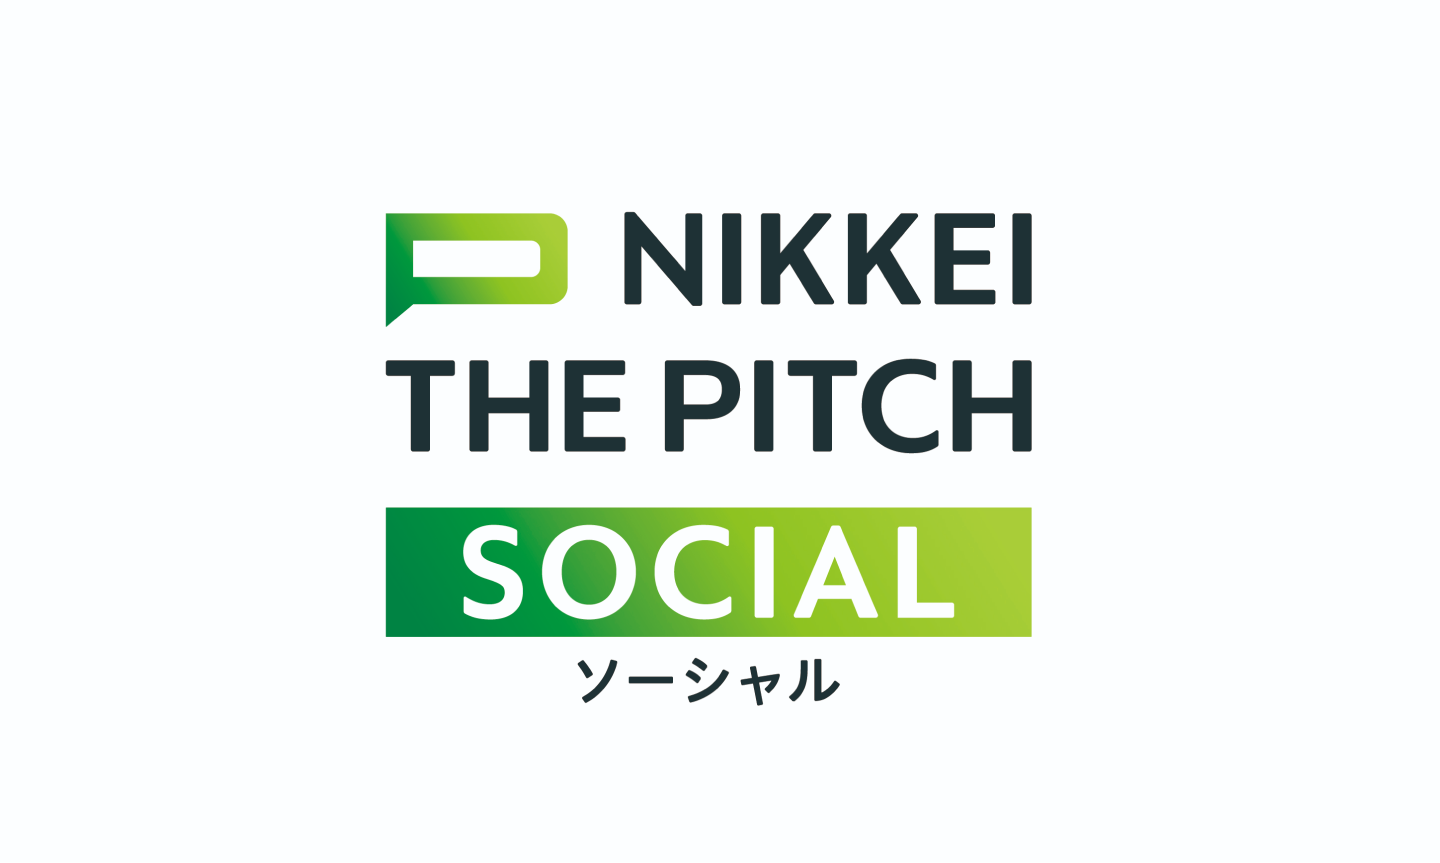 NIKKEI THE PITCH SOCIAL ～ソーシャルビジネス支援プロジェクト～